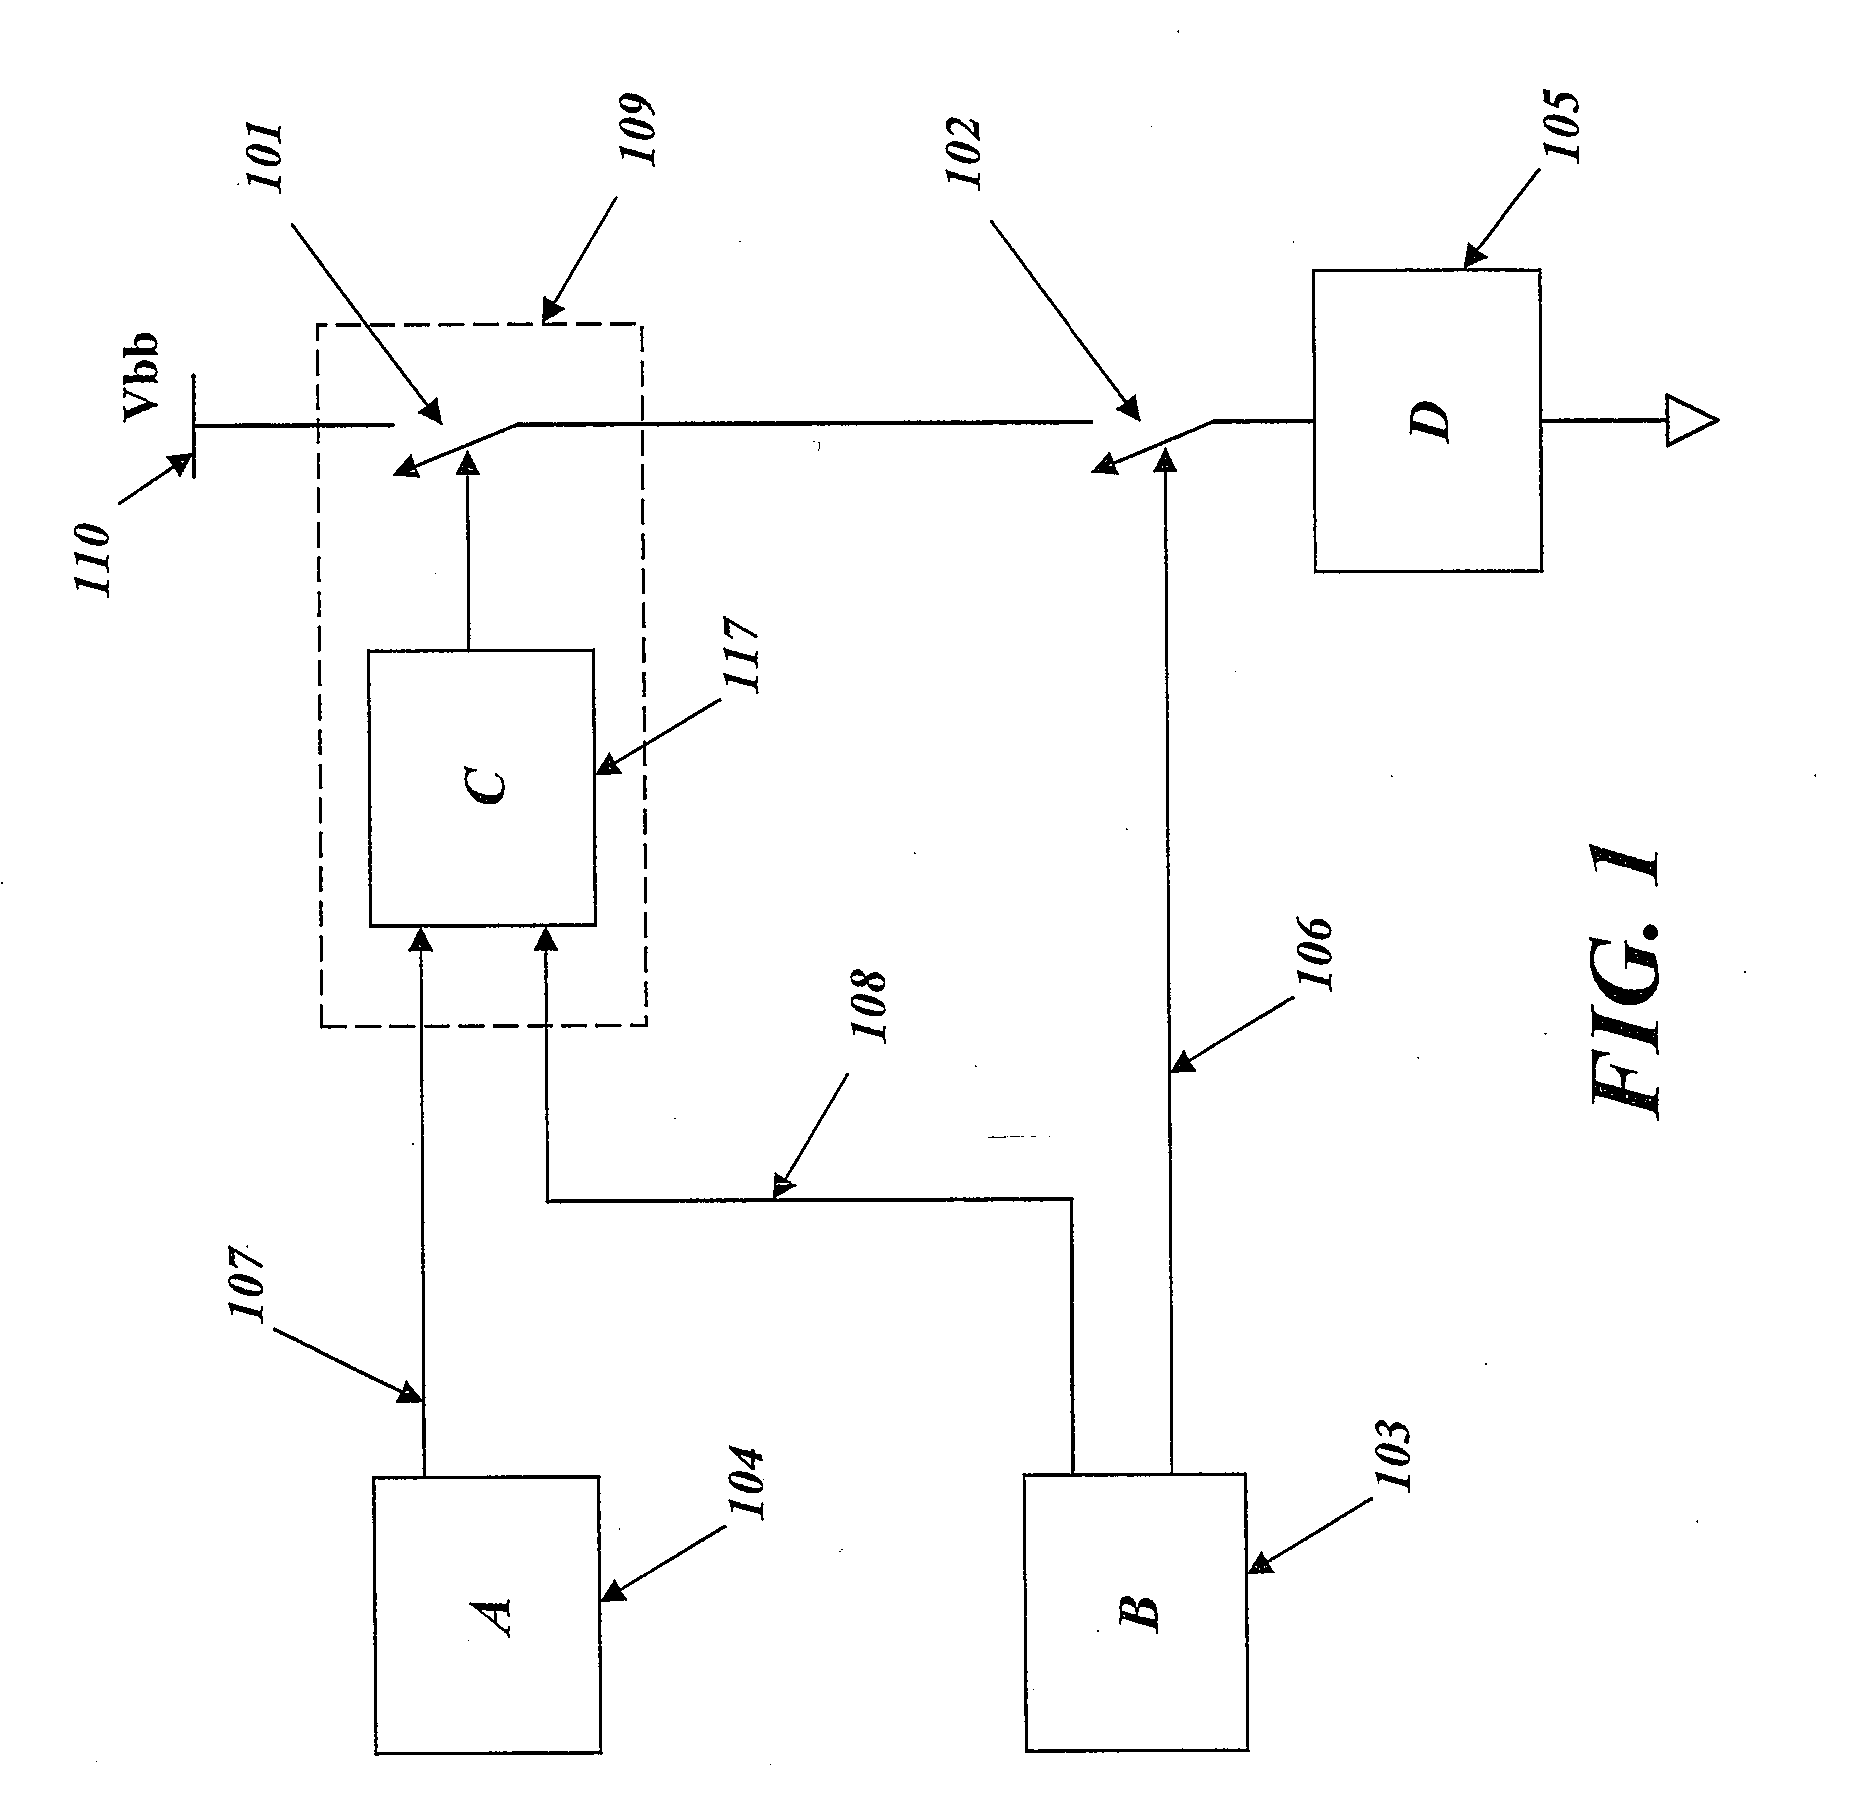 Clock-Pulsed Safety Switch